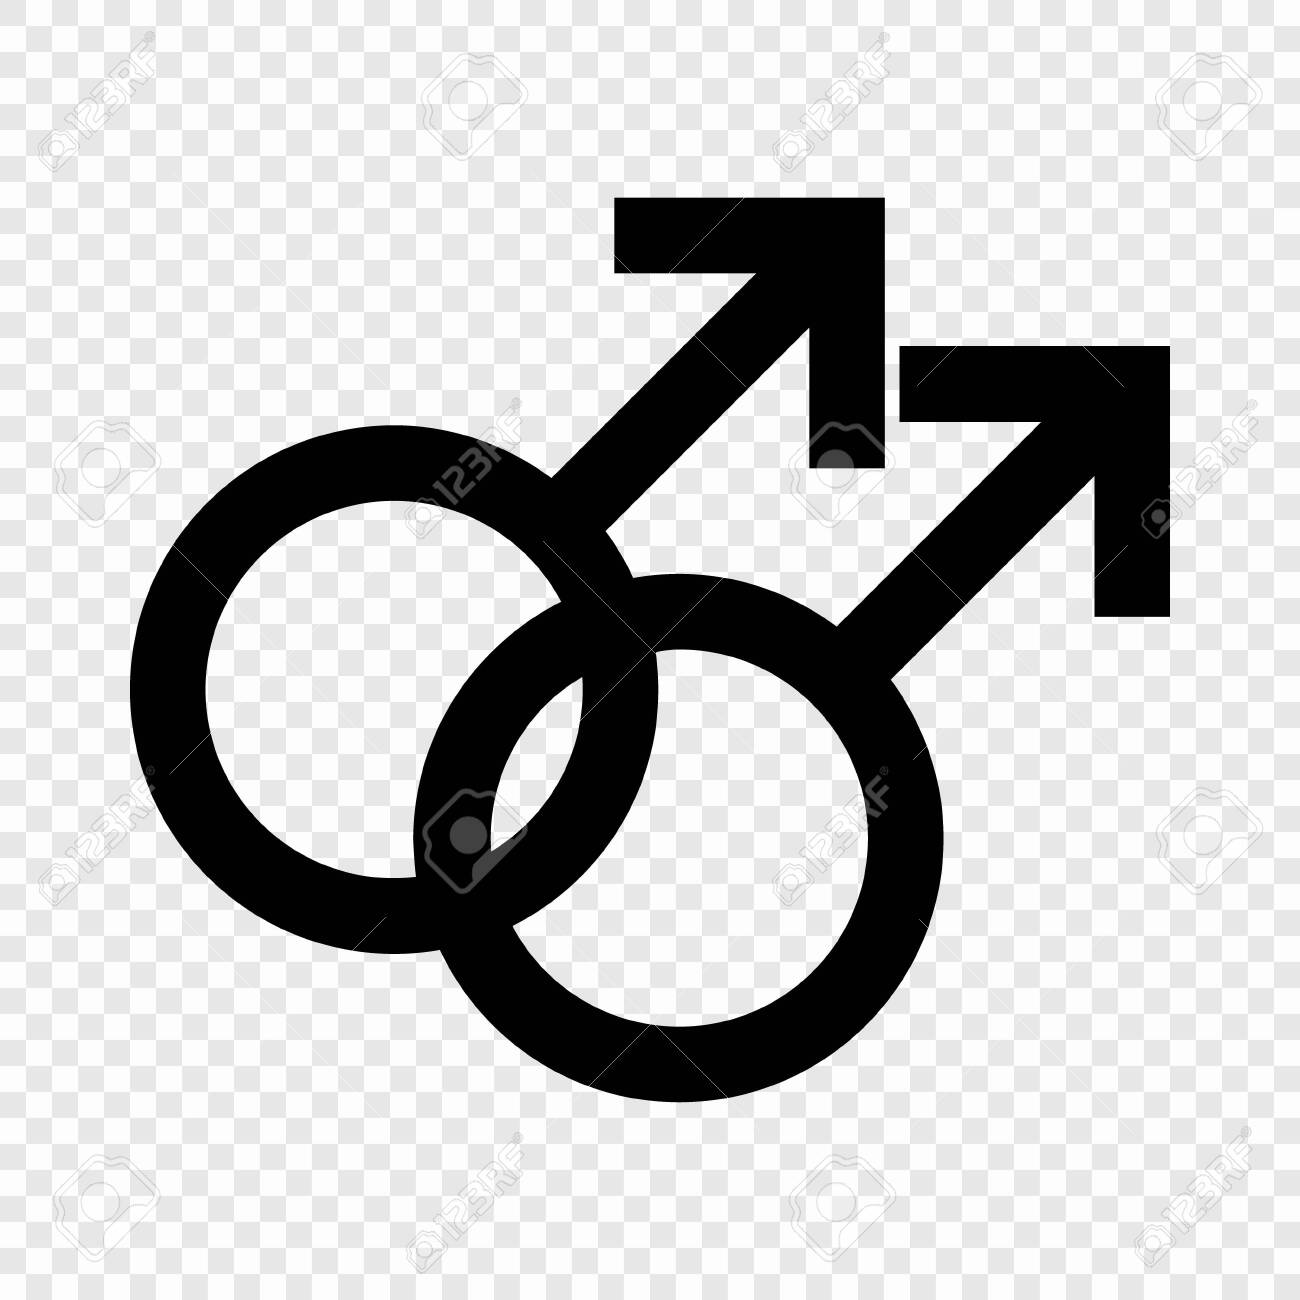 Double Male Symbol Represents Gay Males Template For Your